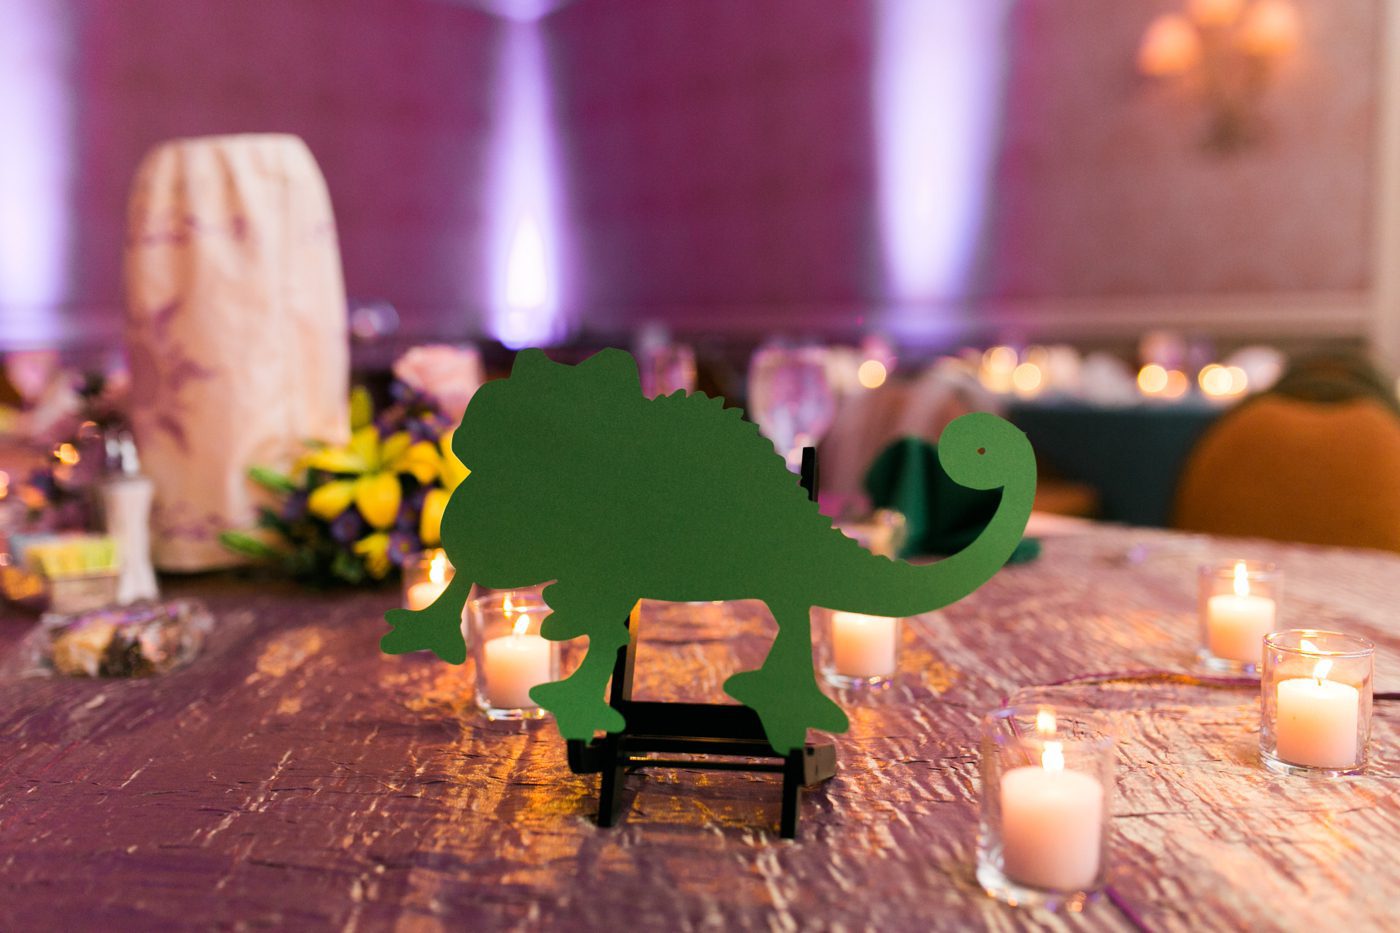 Rapunzel wedding reception decor with Pascal cutout and candles 